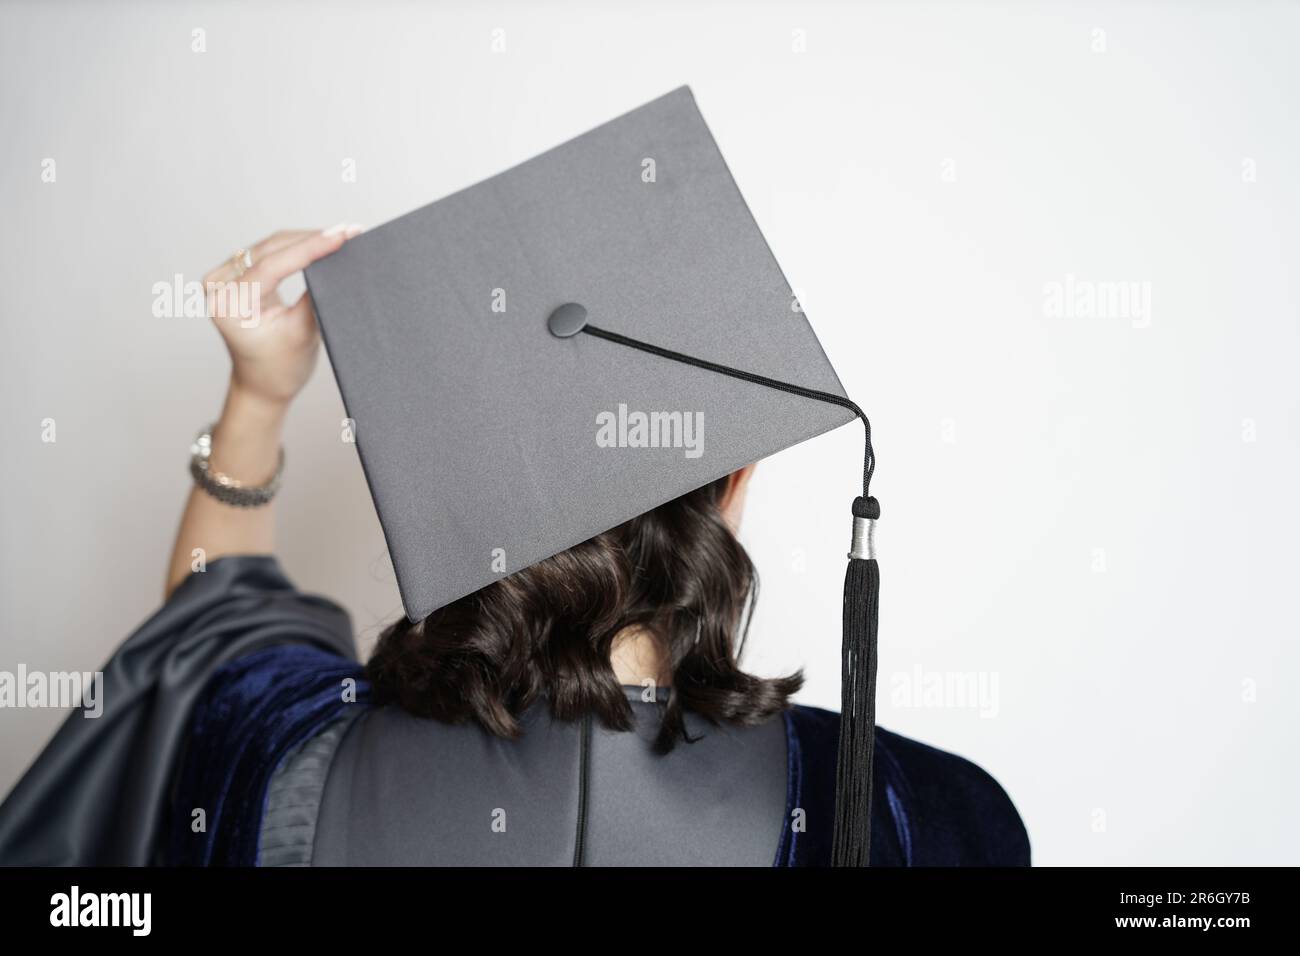 A clear photo of a girl wearing a graduation gown with white space for  text. A woman is standing on a white background wearing gown and cap. Stock Photo